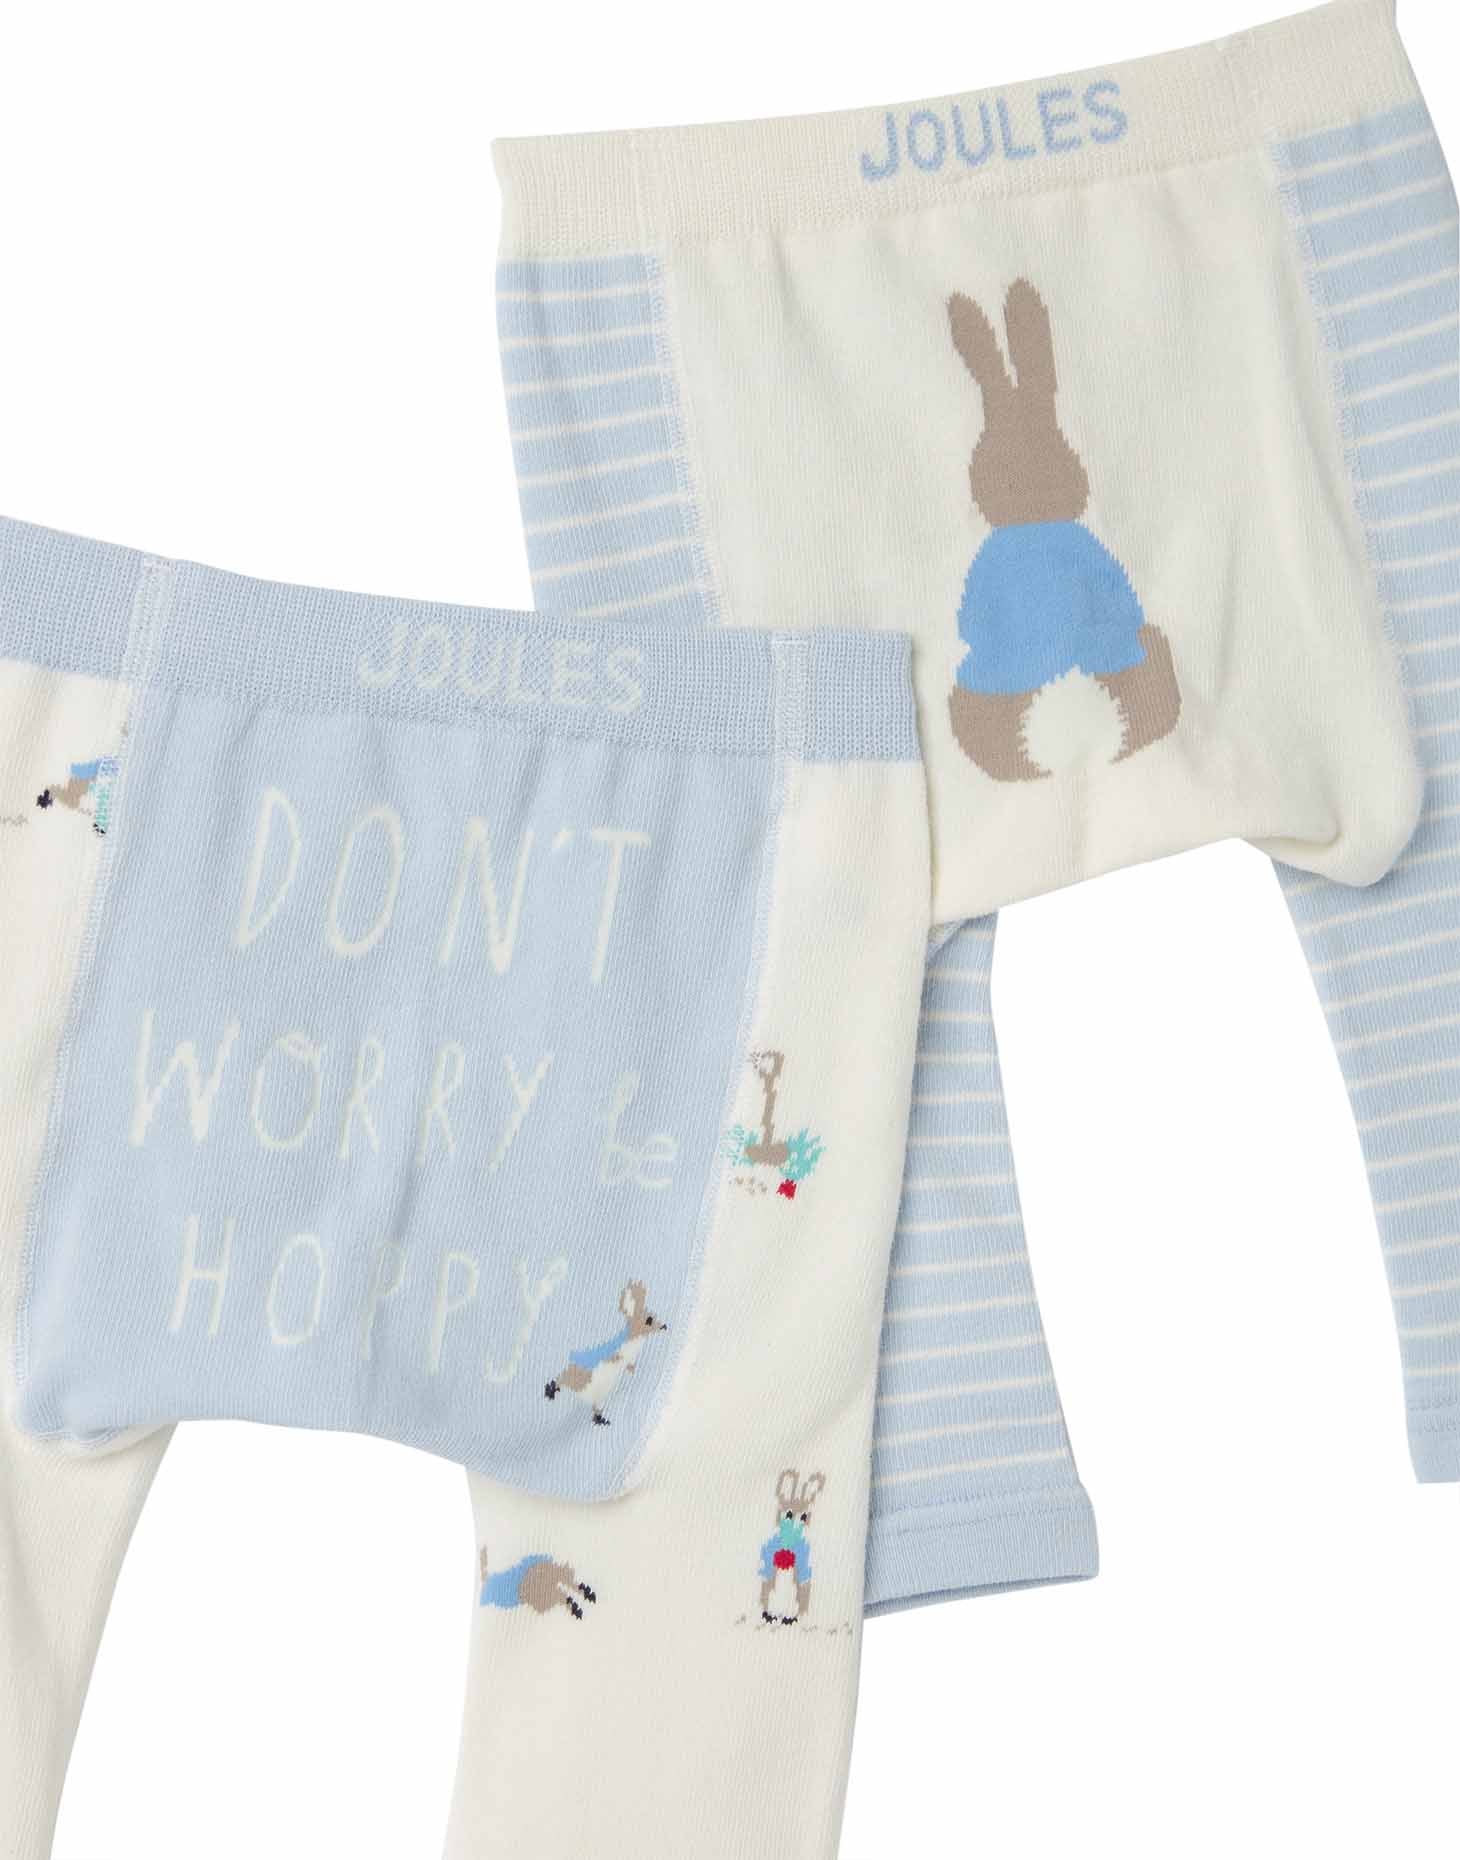 Joules Baby Lively Leggings, 2 Pack – Cow & Sheep